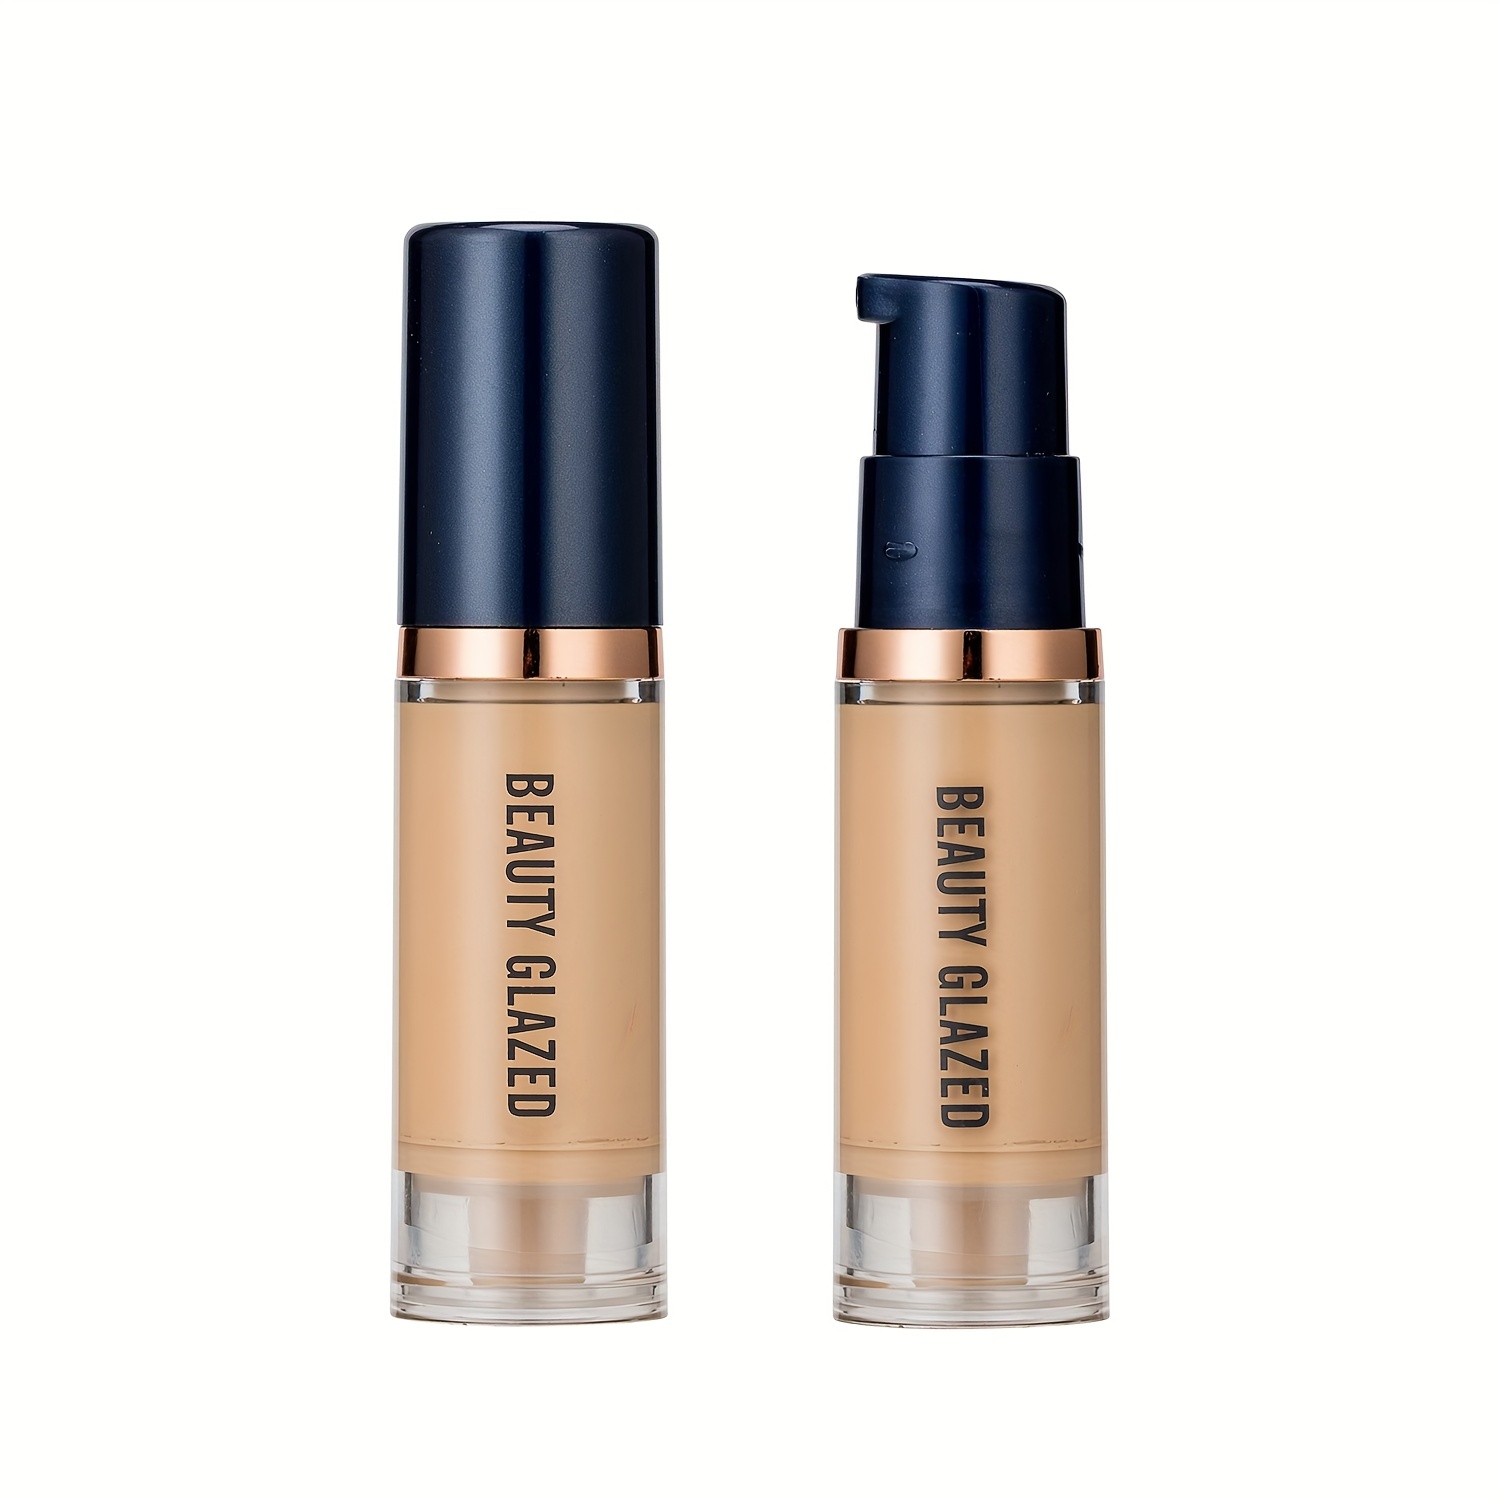 Flormar perfect coverage foundation review.